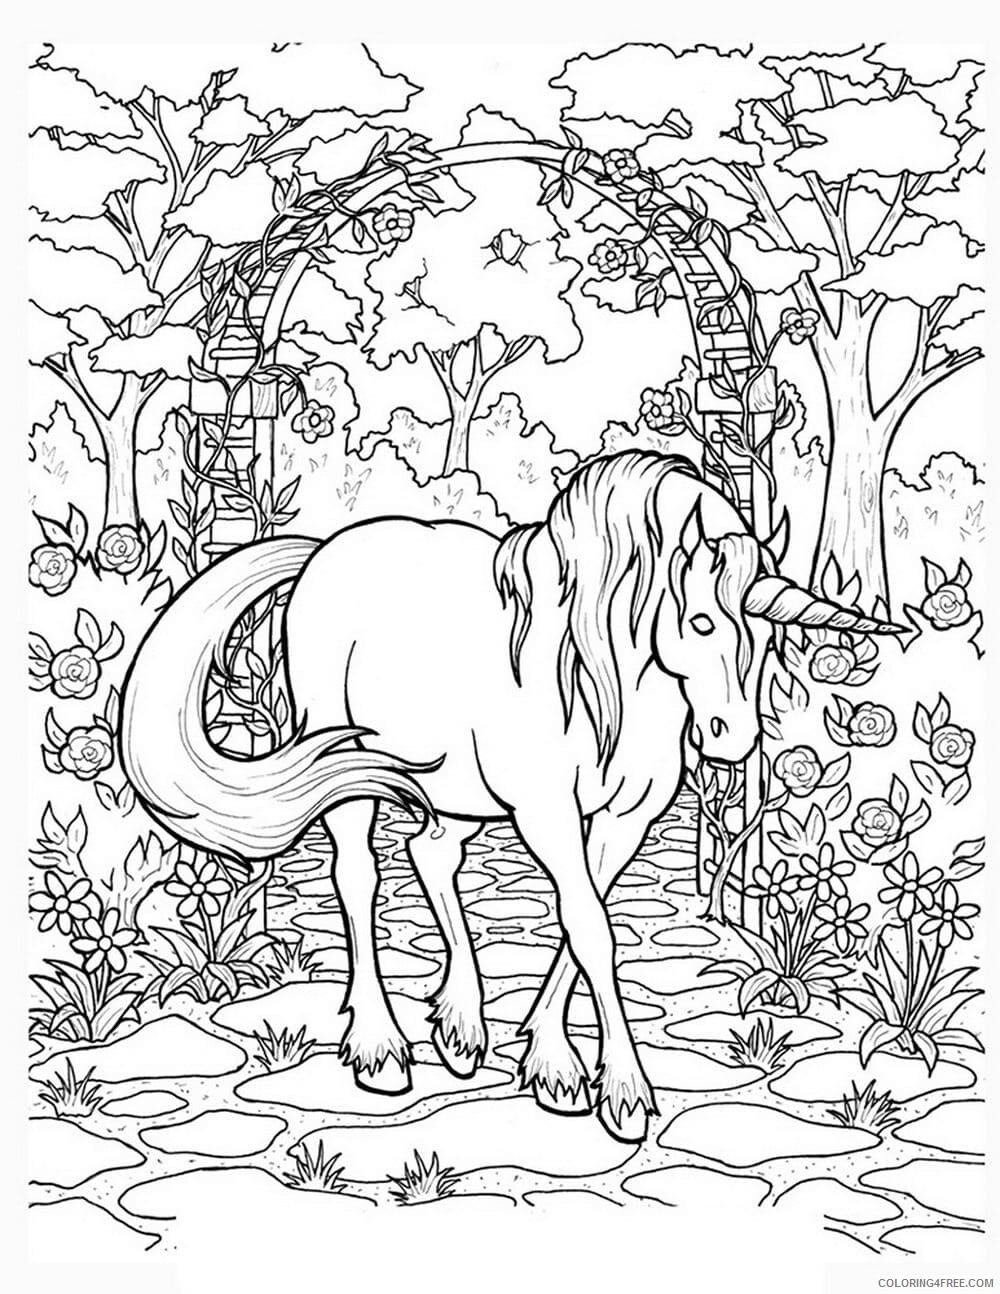 Unicorn Coloring Pages unicorn_in_the_garden Printable 2021 6059 Coloring4free